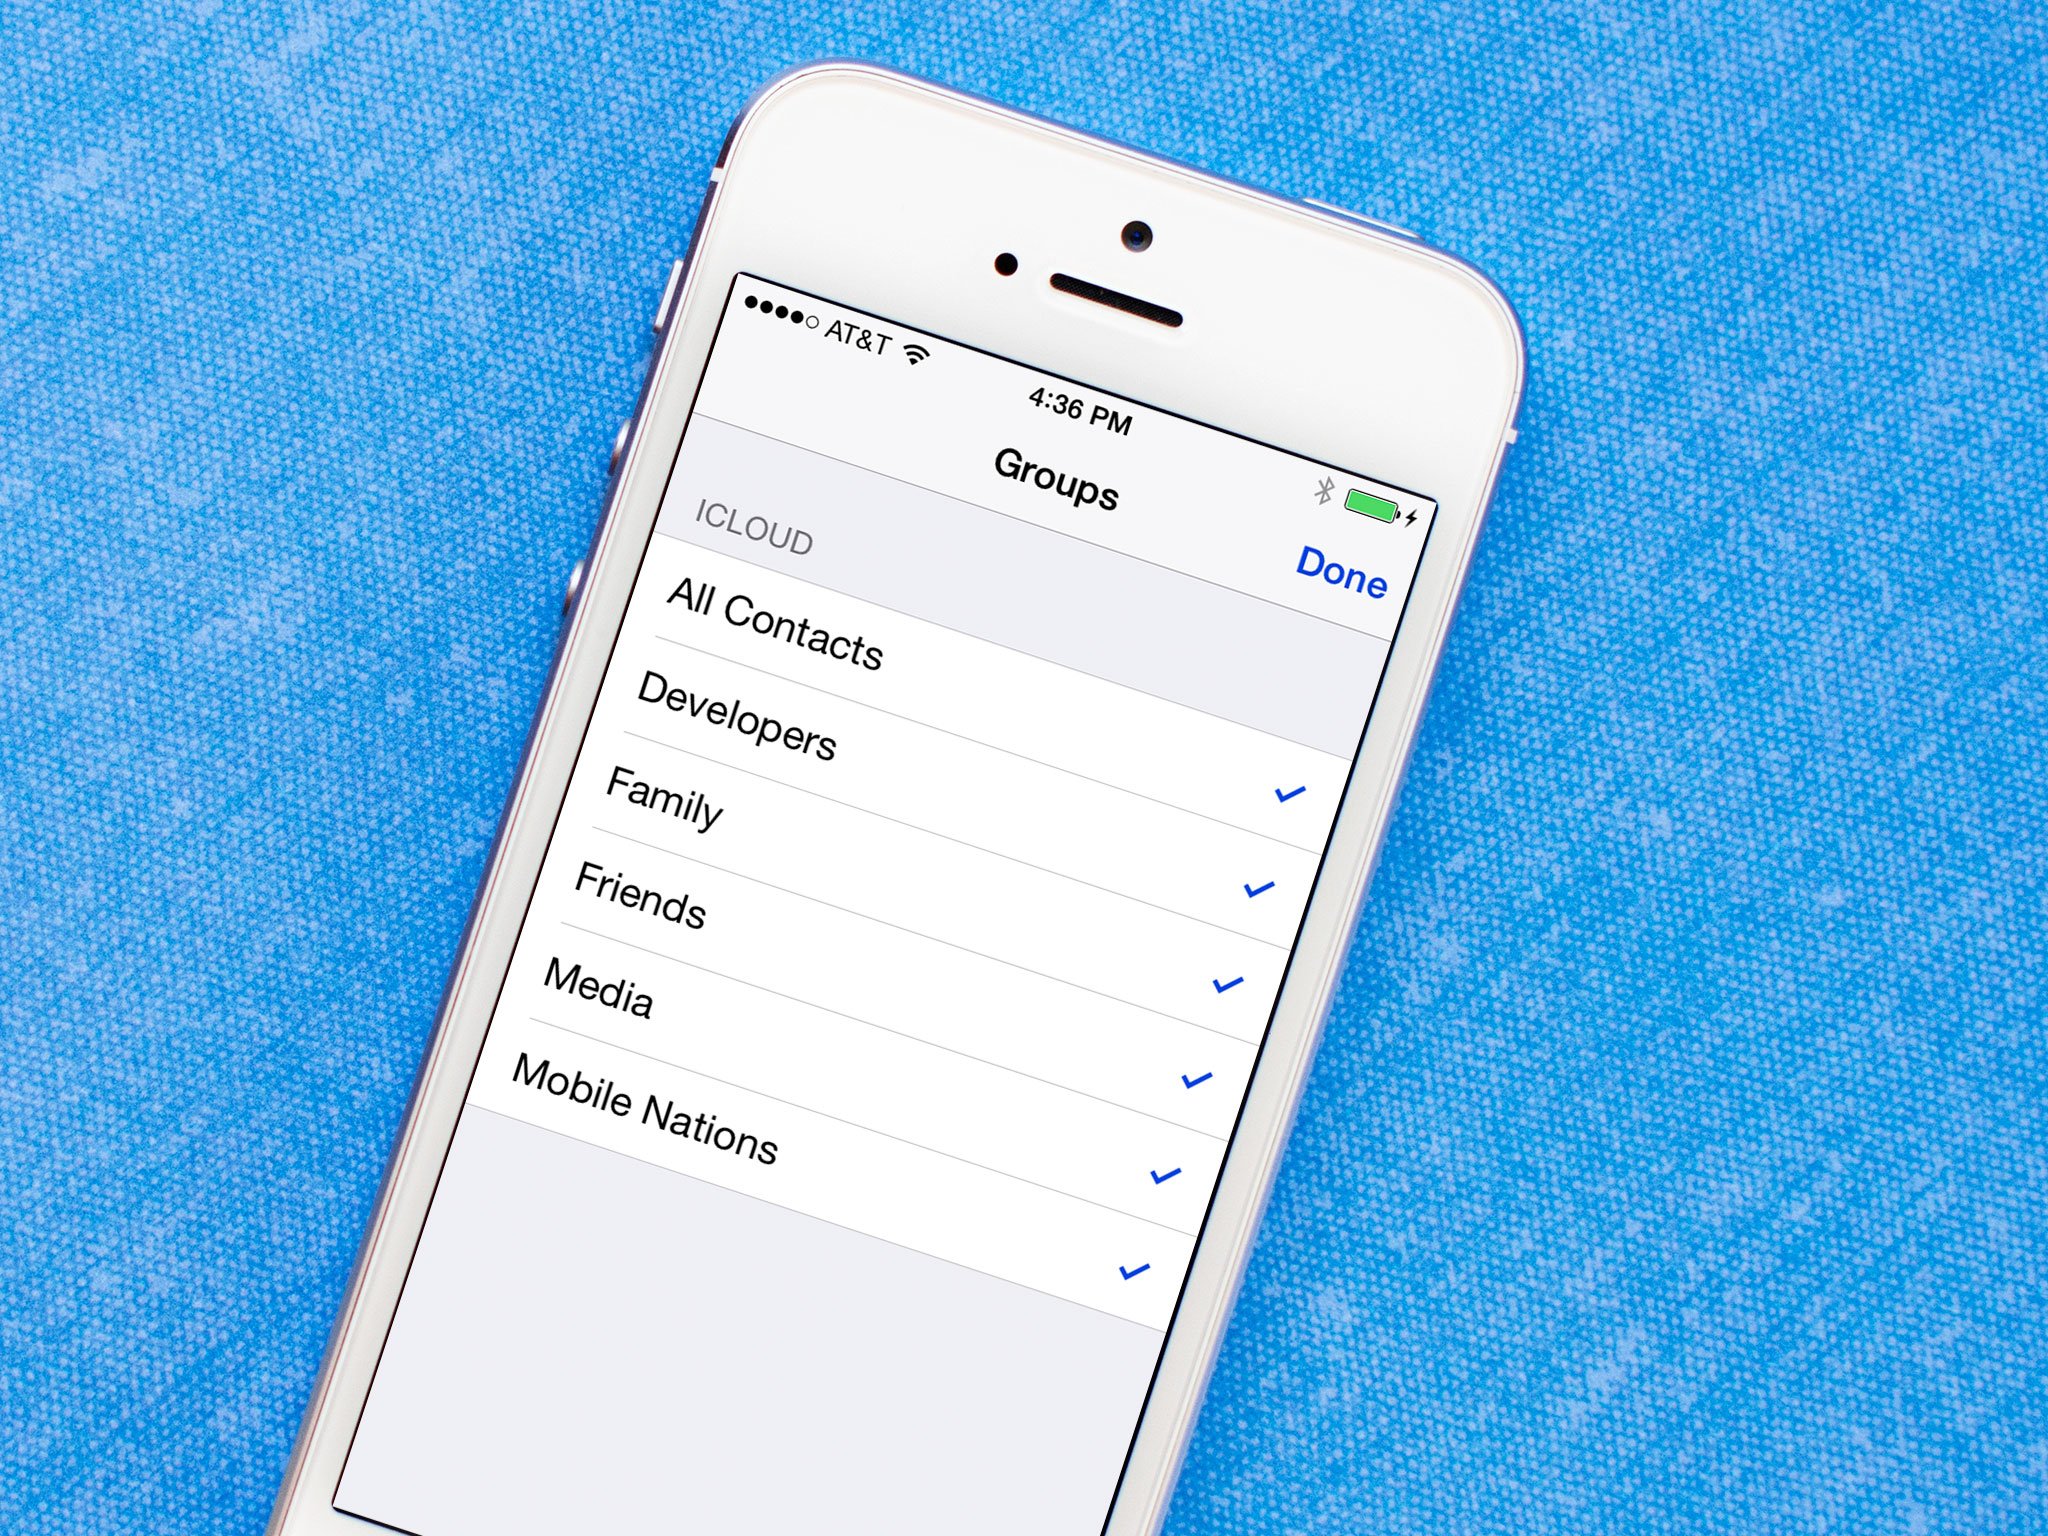 How to create, edit, and delete contact groups in iCloud